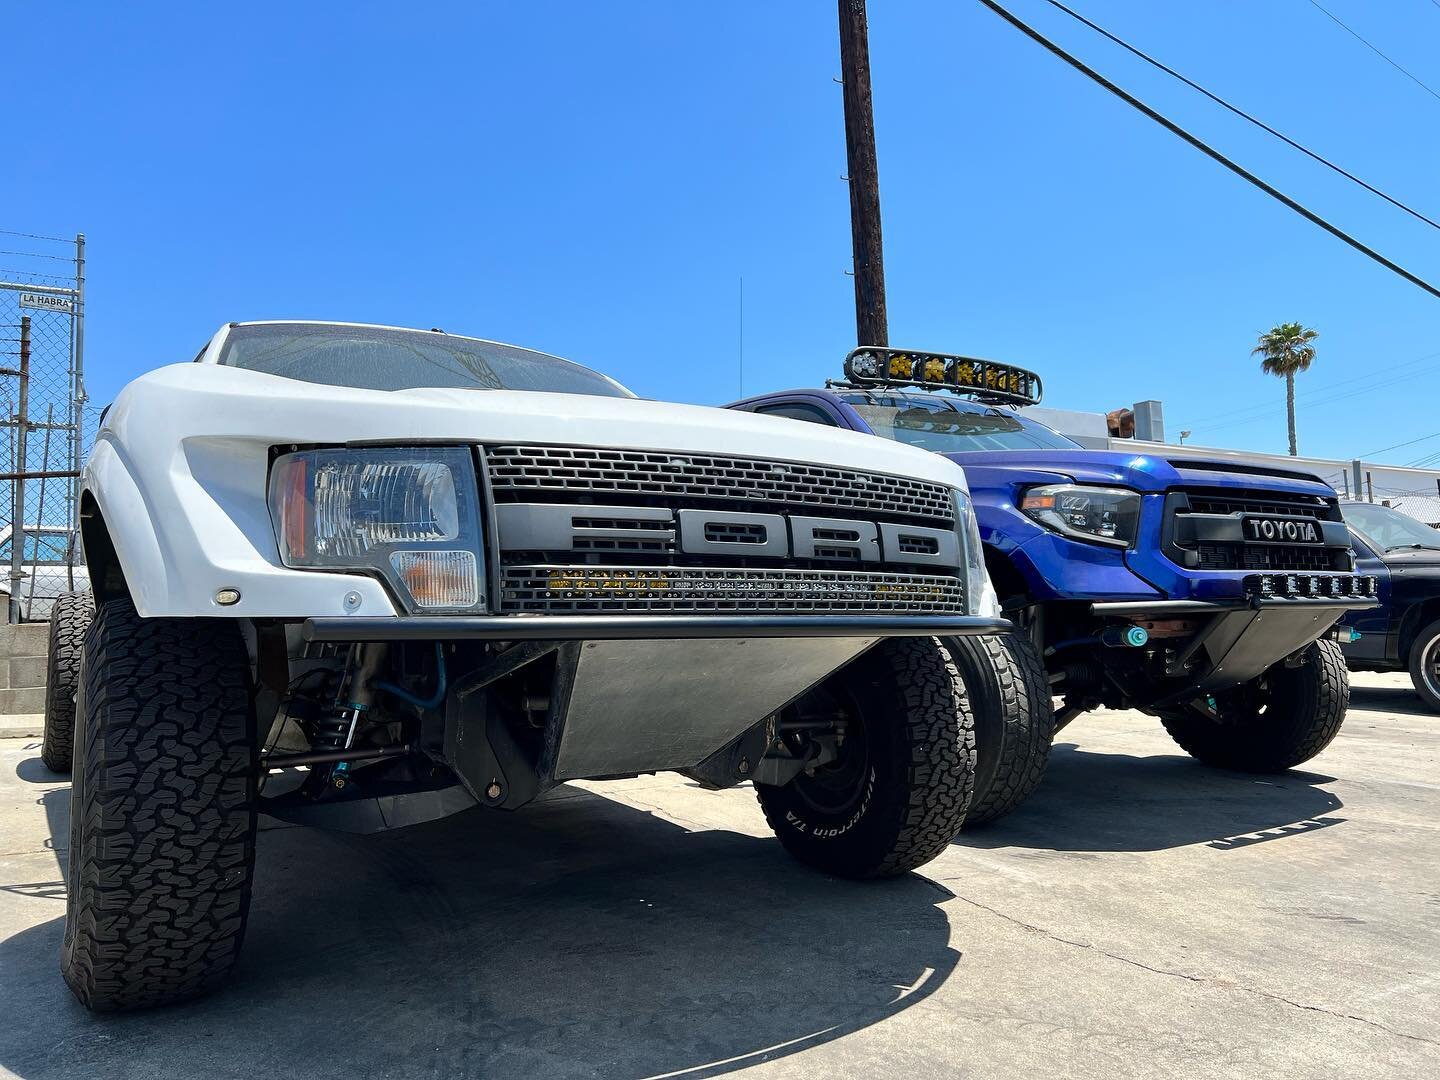 It&rsquo;s always a good day when the sun is out and you have a couple of wide ones to work on&hellip; #evilmfg #evilmanufacturing #eviloffroad #liveevil #evilinside @texa_rado #fordf150 #toyotatundra